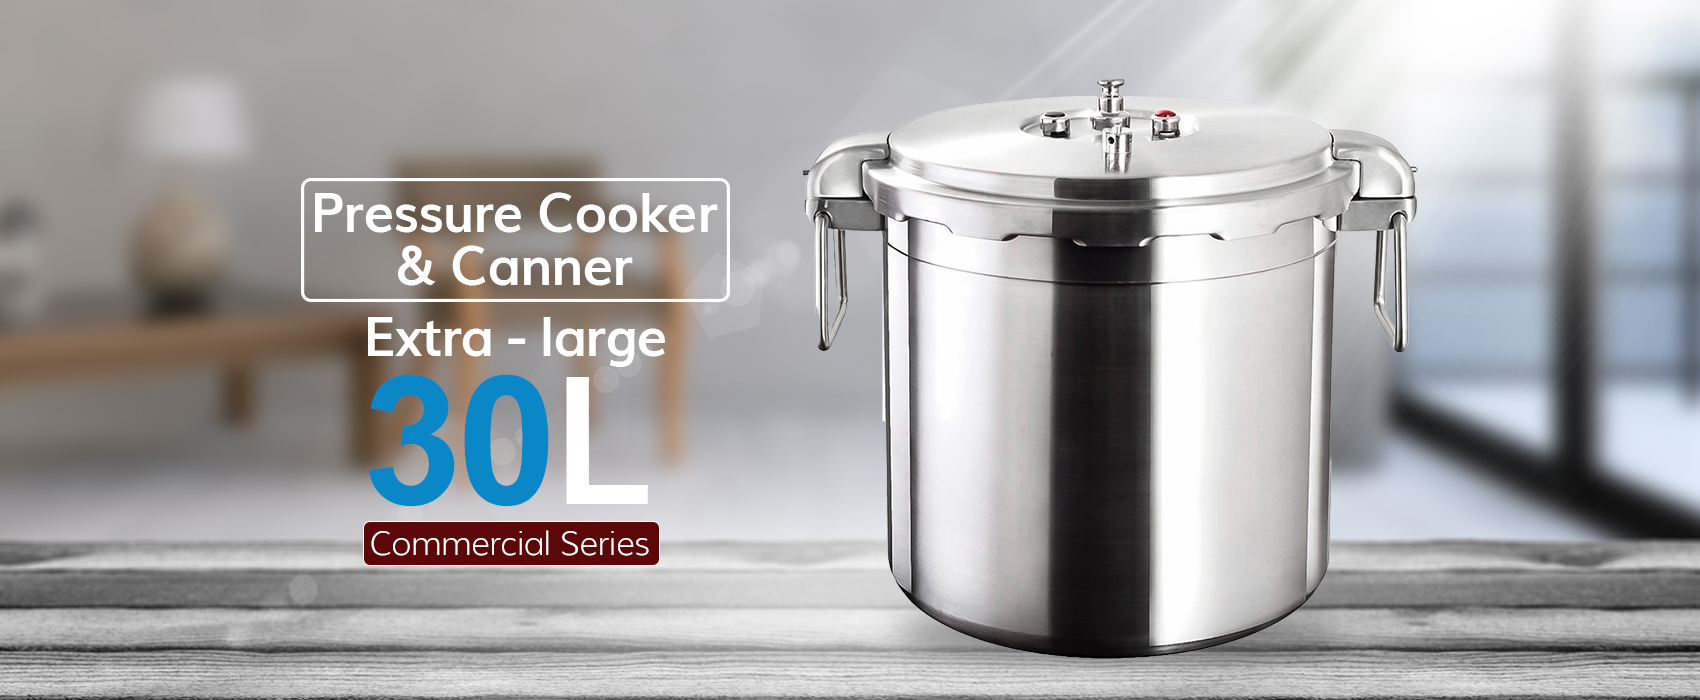 https://www.buffalocookware.com/content/files/images/Product%20page%20design/04.QCP/QCP430/EG/QCP-430-001-EG.jpg